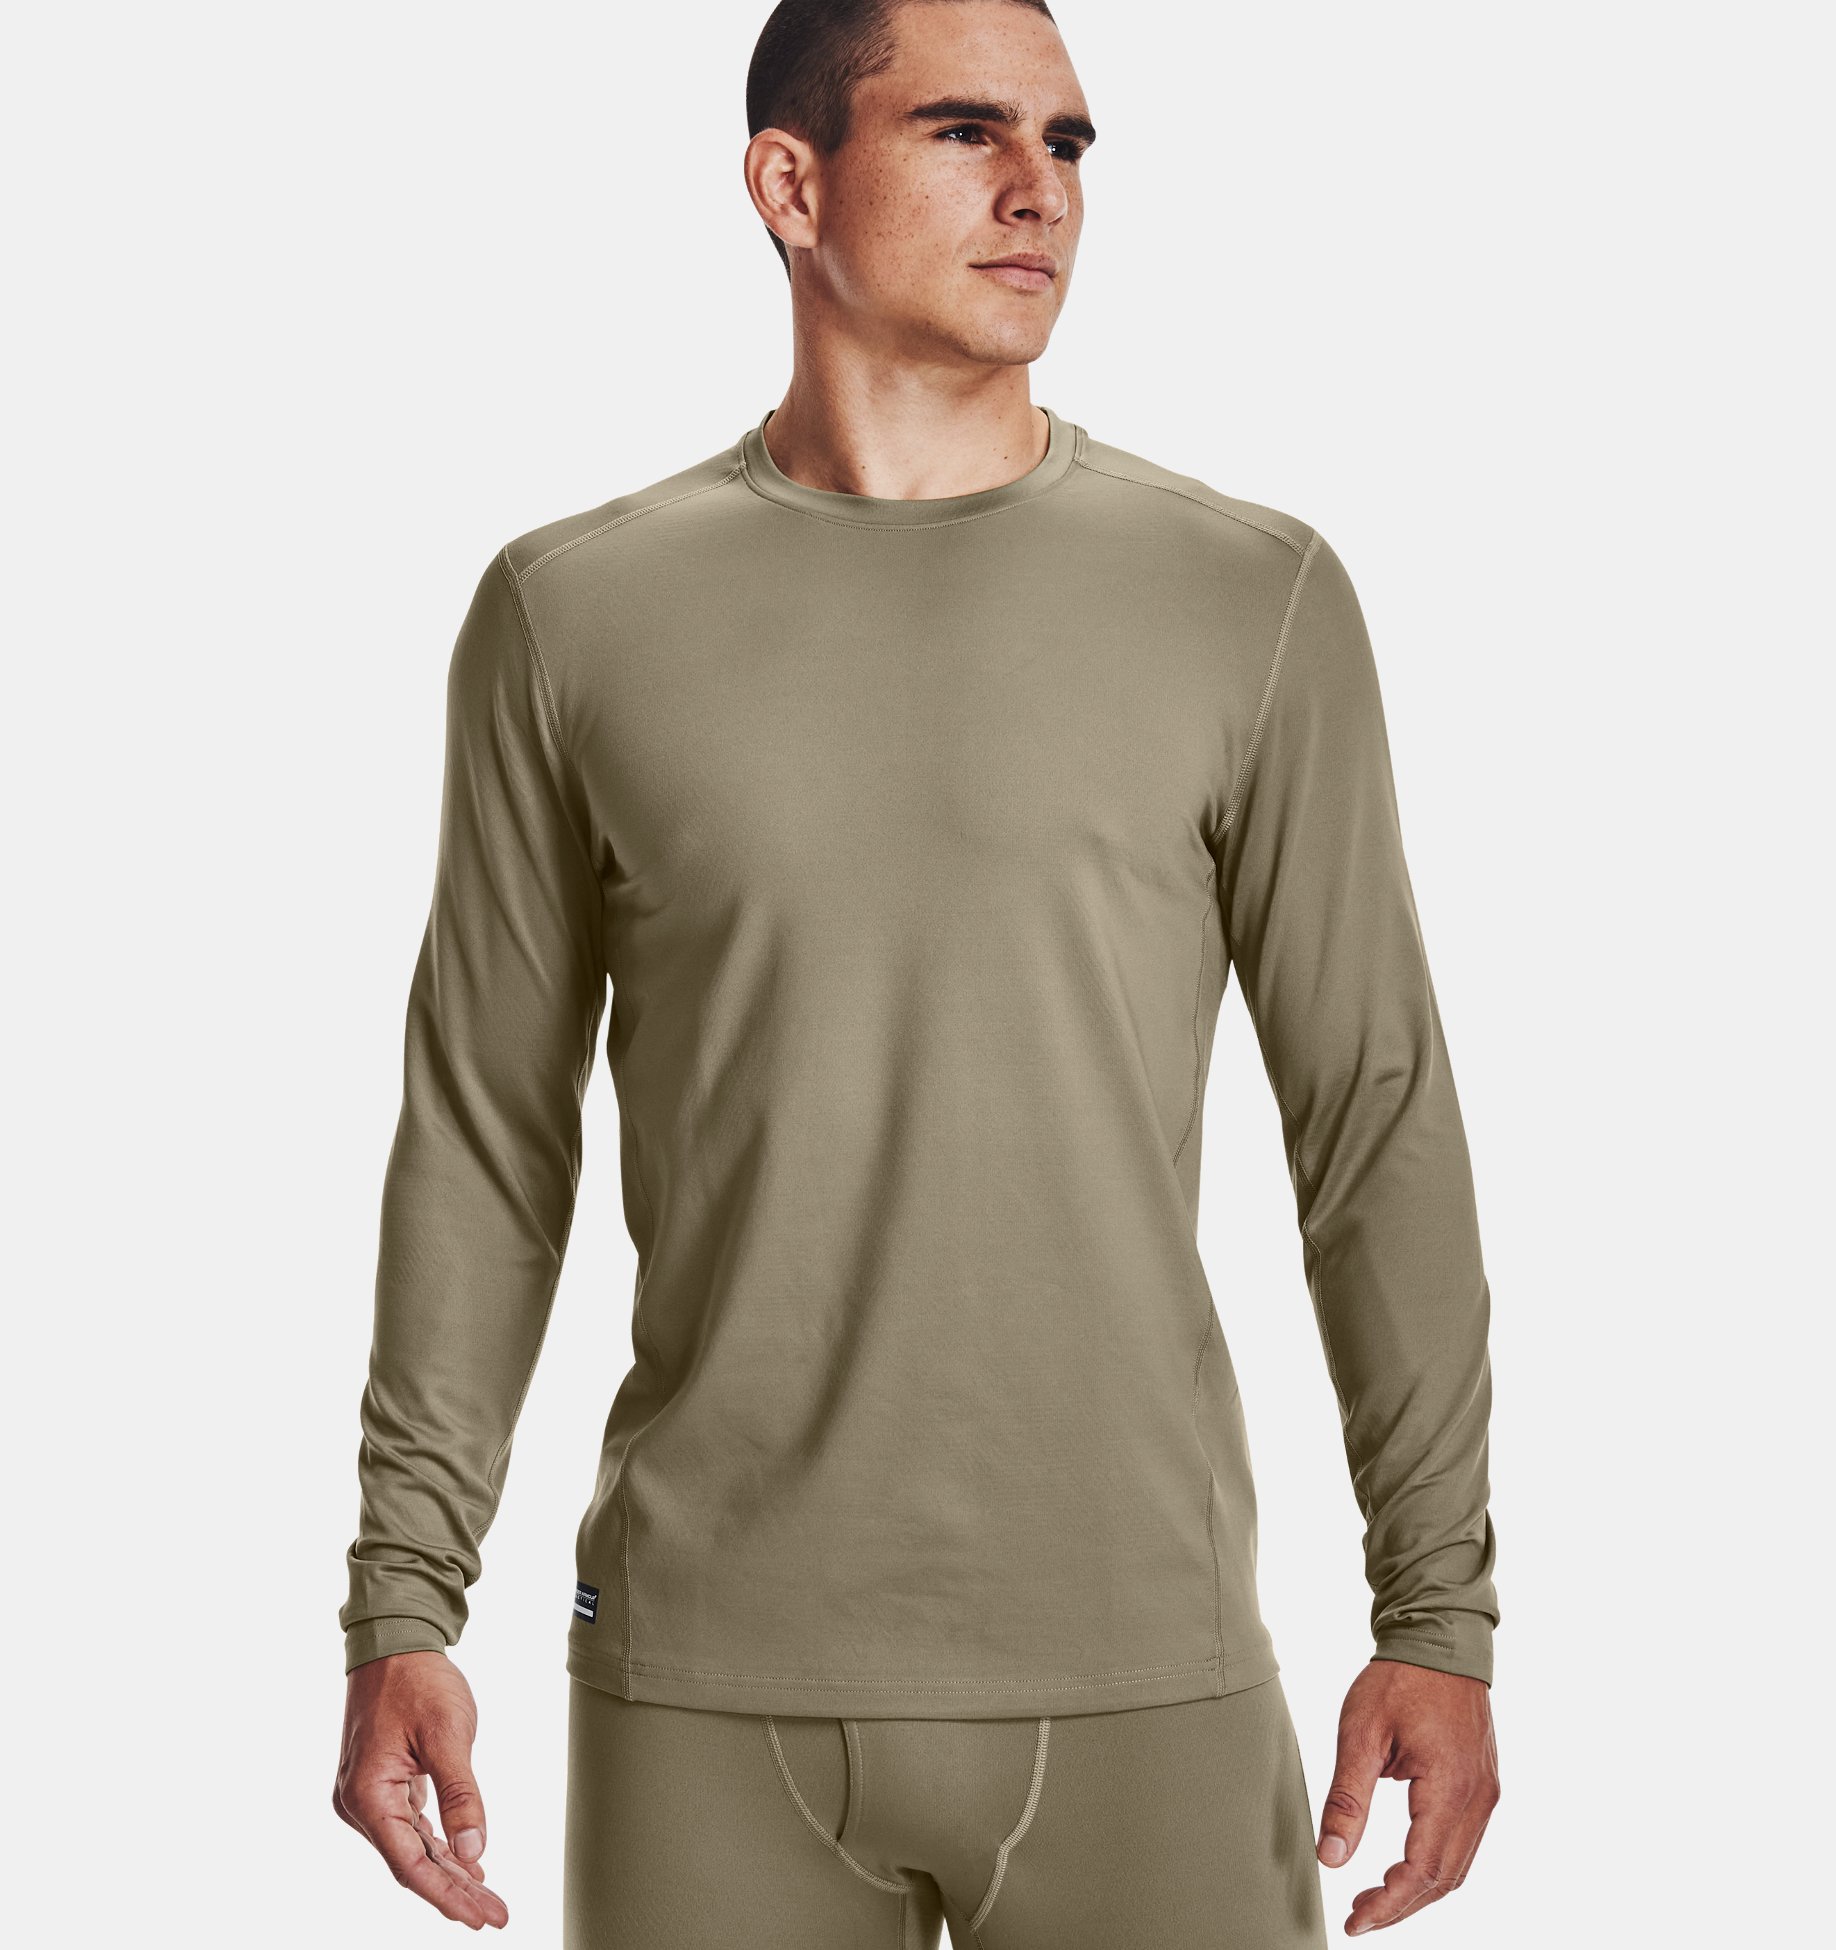 Men's Under Armour InfraRed ColdGear Tactical Long Sleeve Base Layer Shirt New 